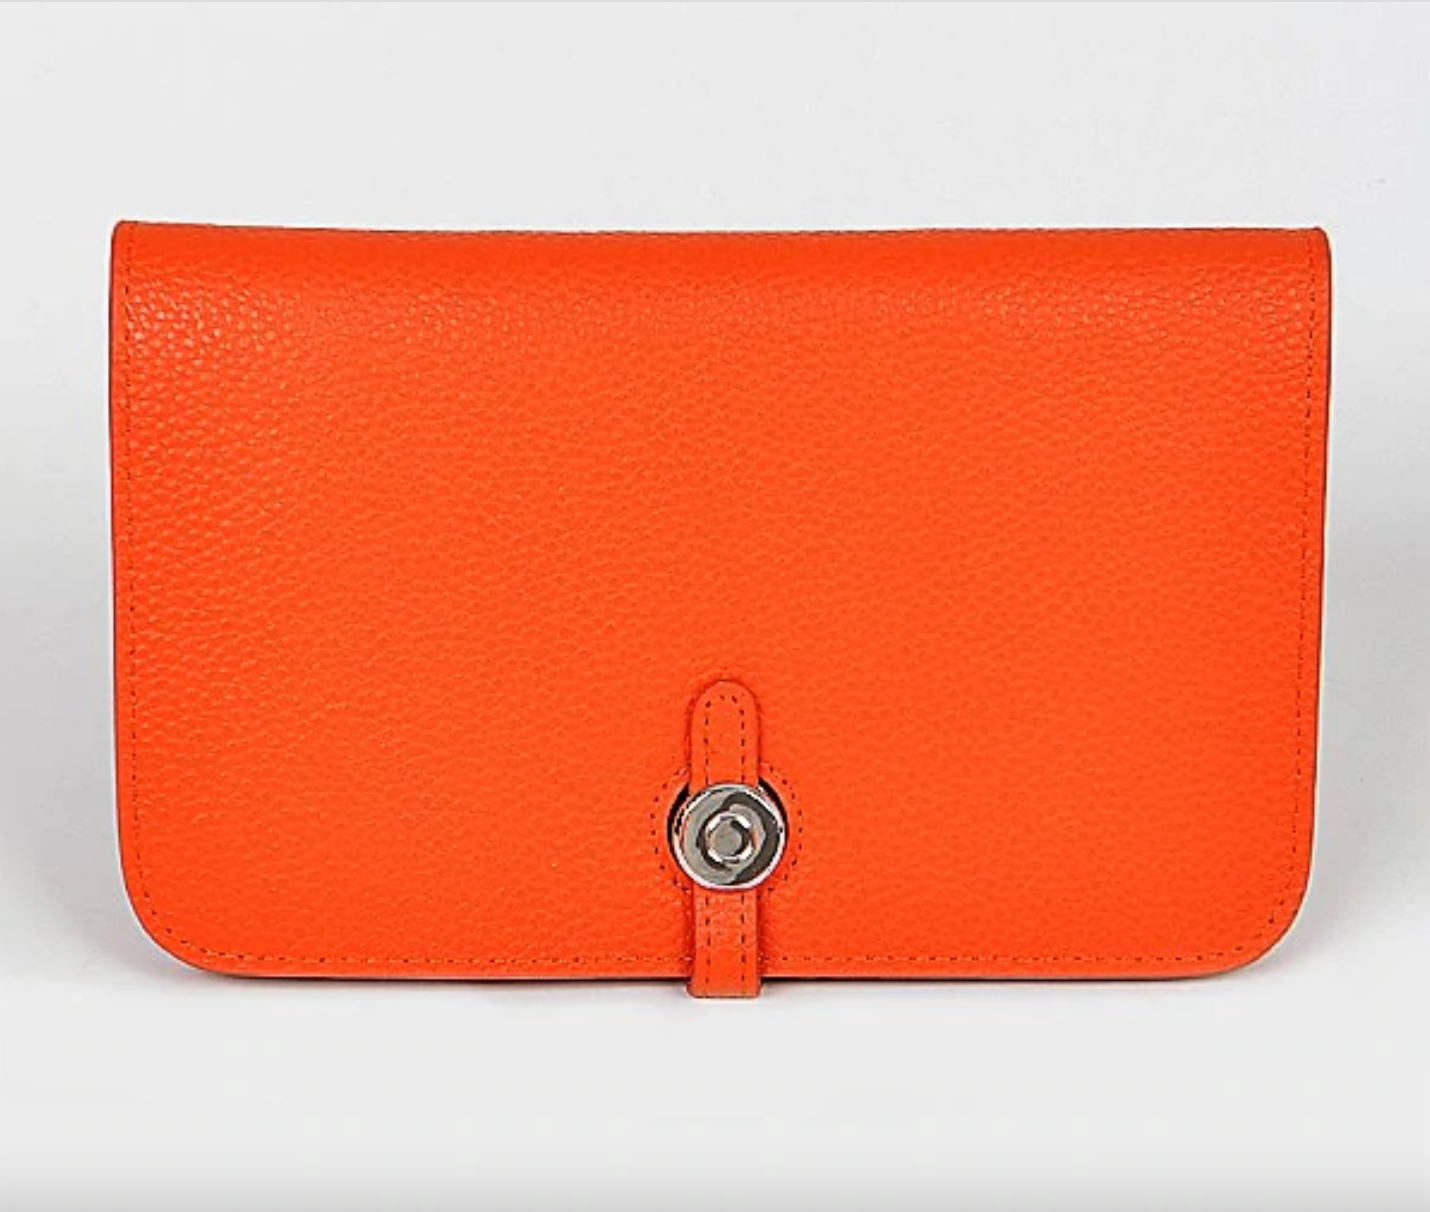 Hermes, Bags, Hermes Dogon Compact Wallet Red Leather